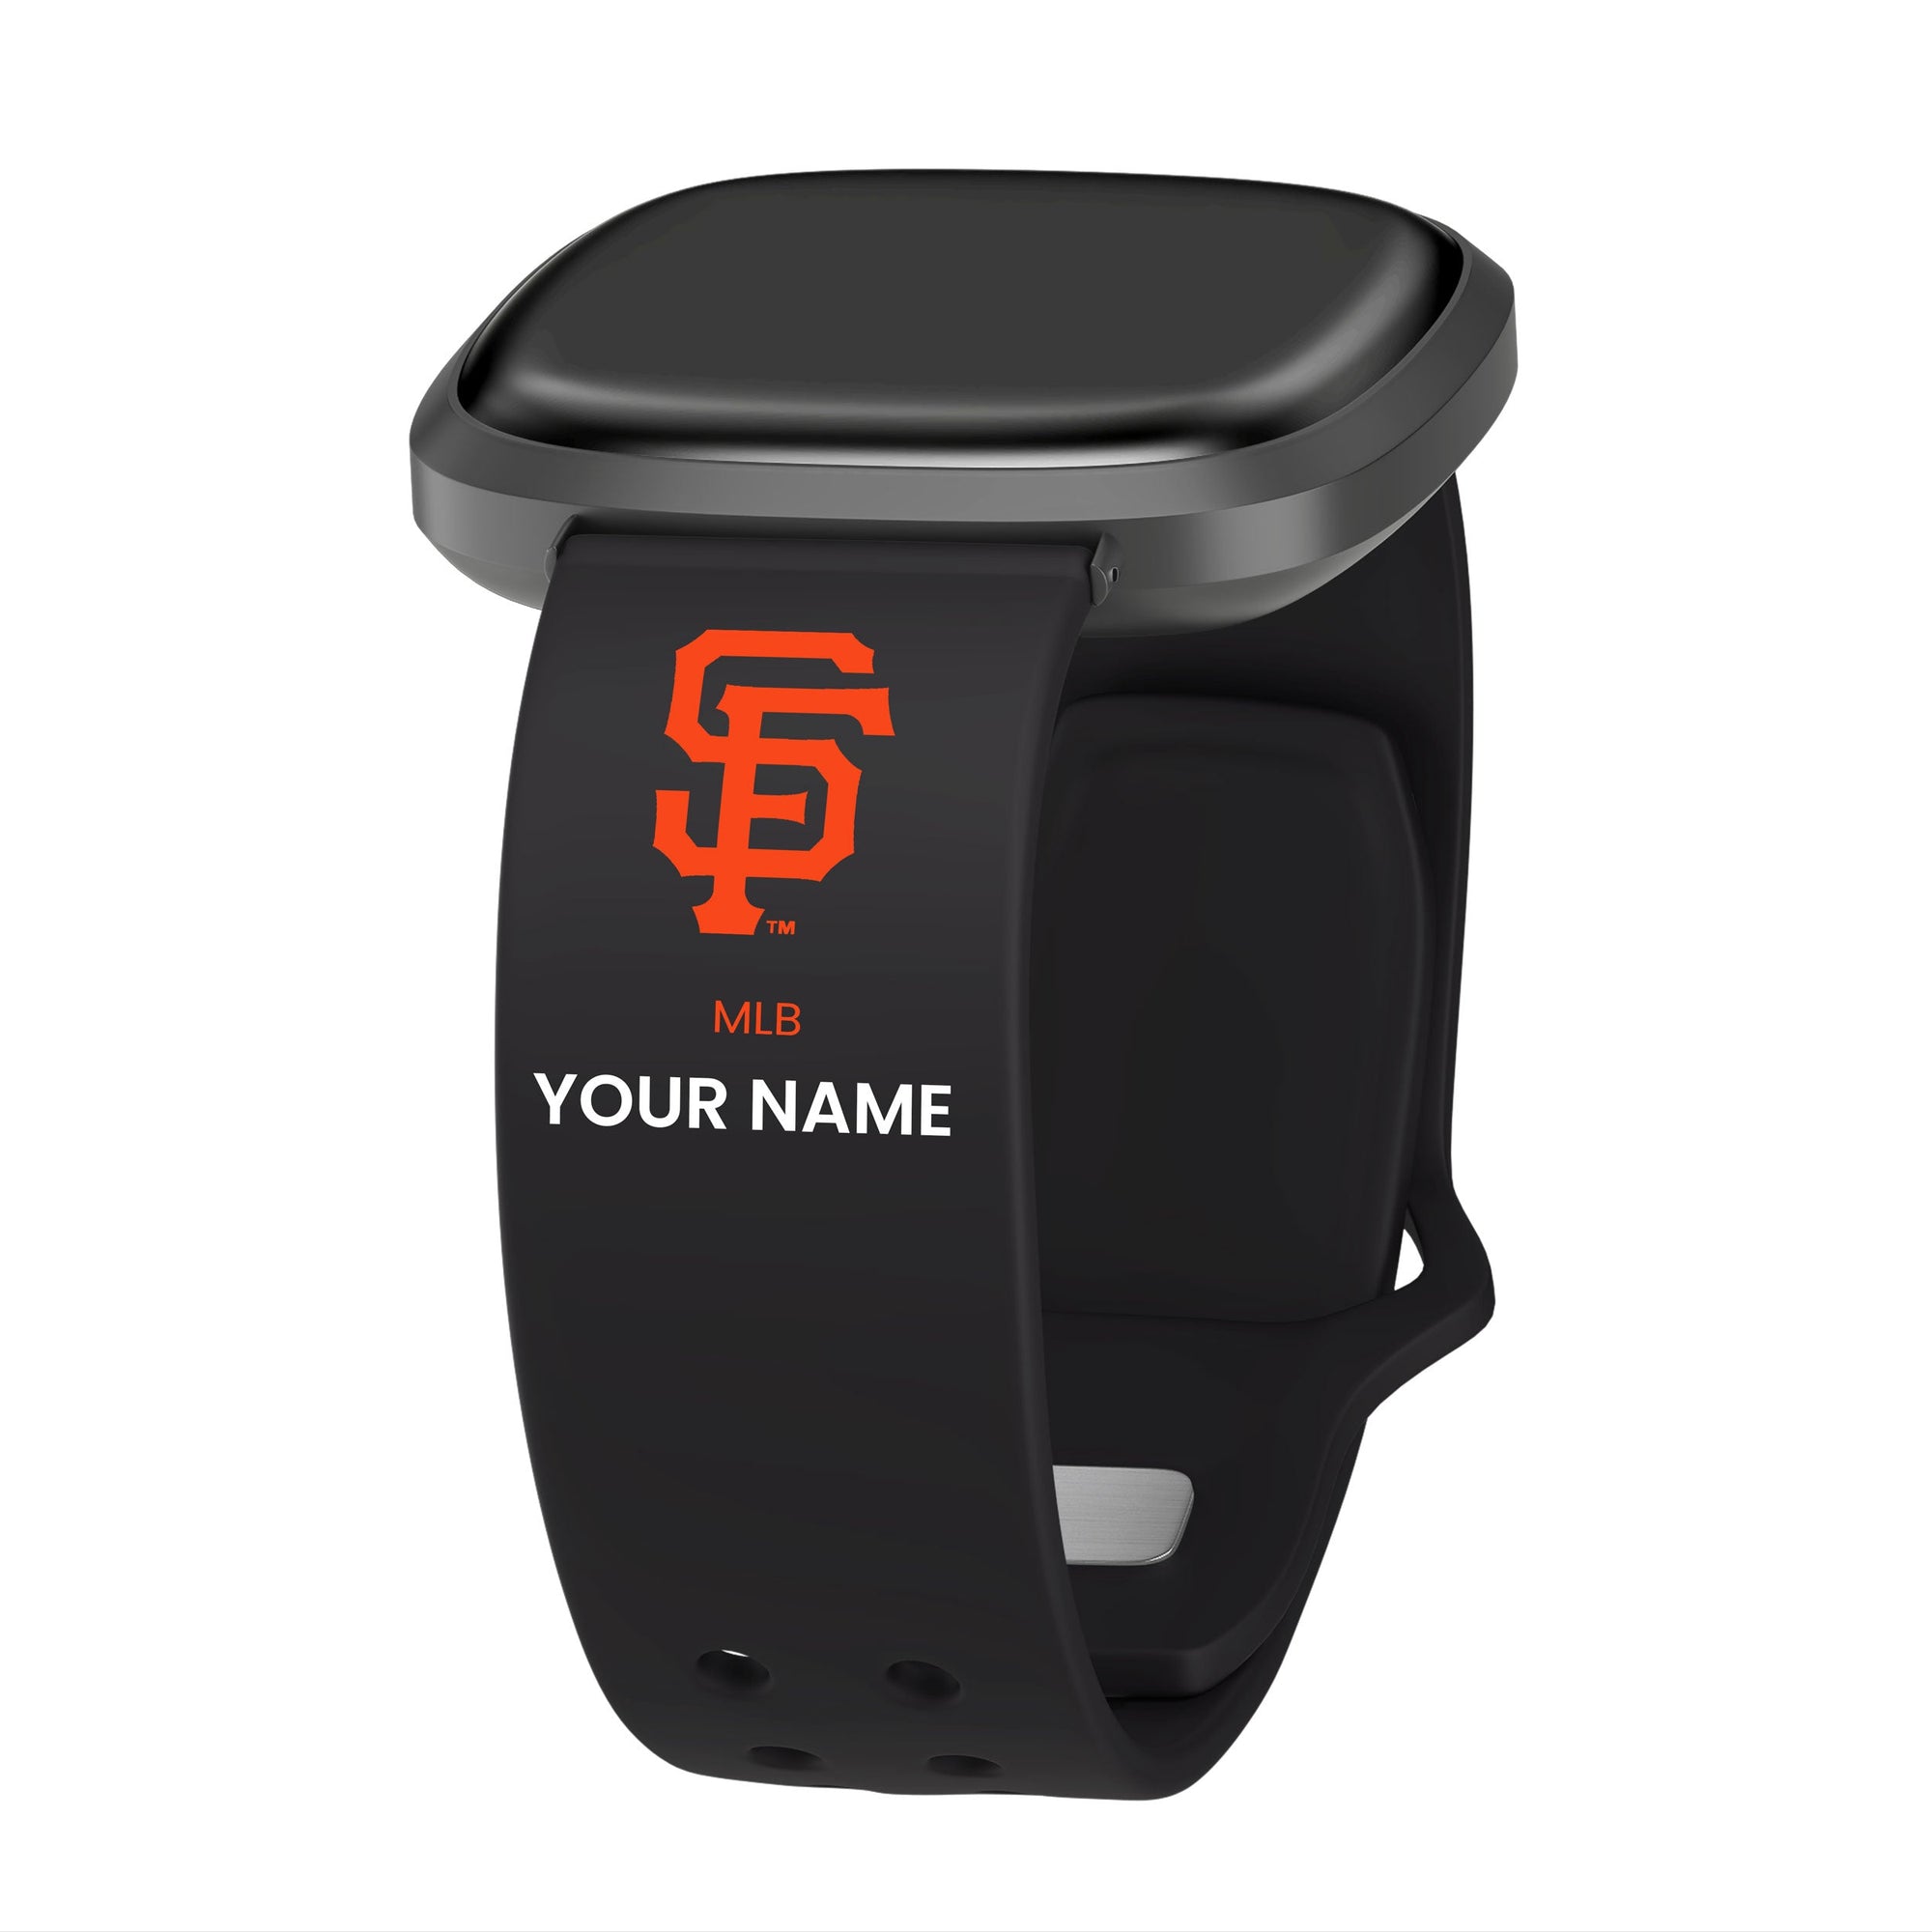 San Francisco Giants HD Custom Name Watch Band Compatible with Fitbit Versa 3 and Sense